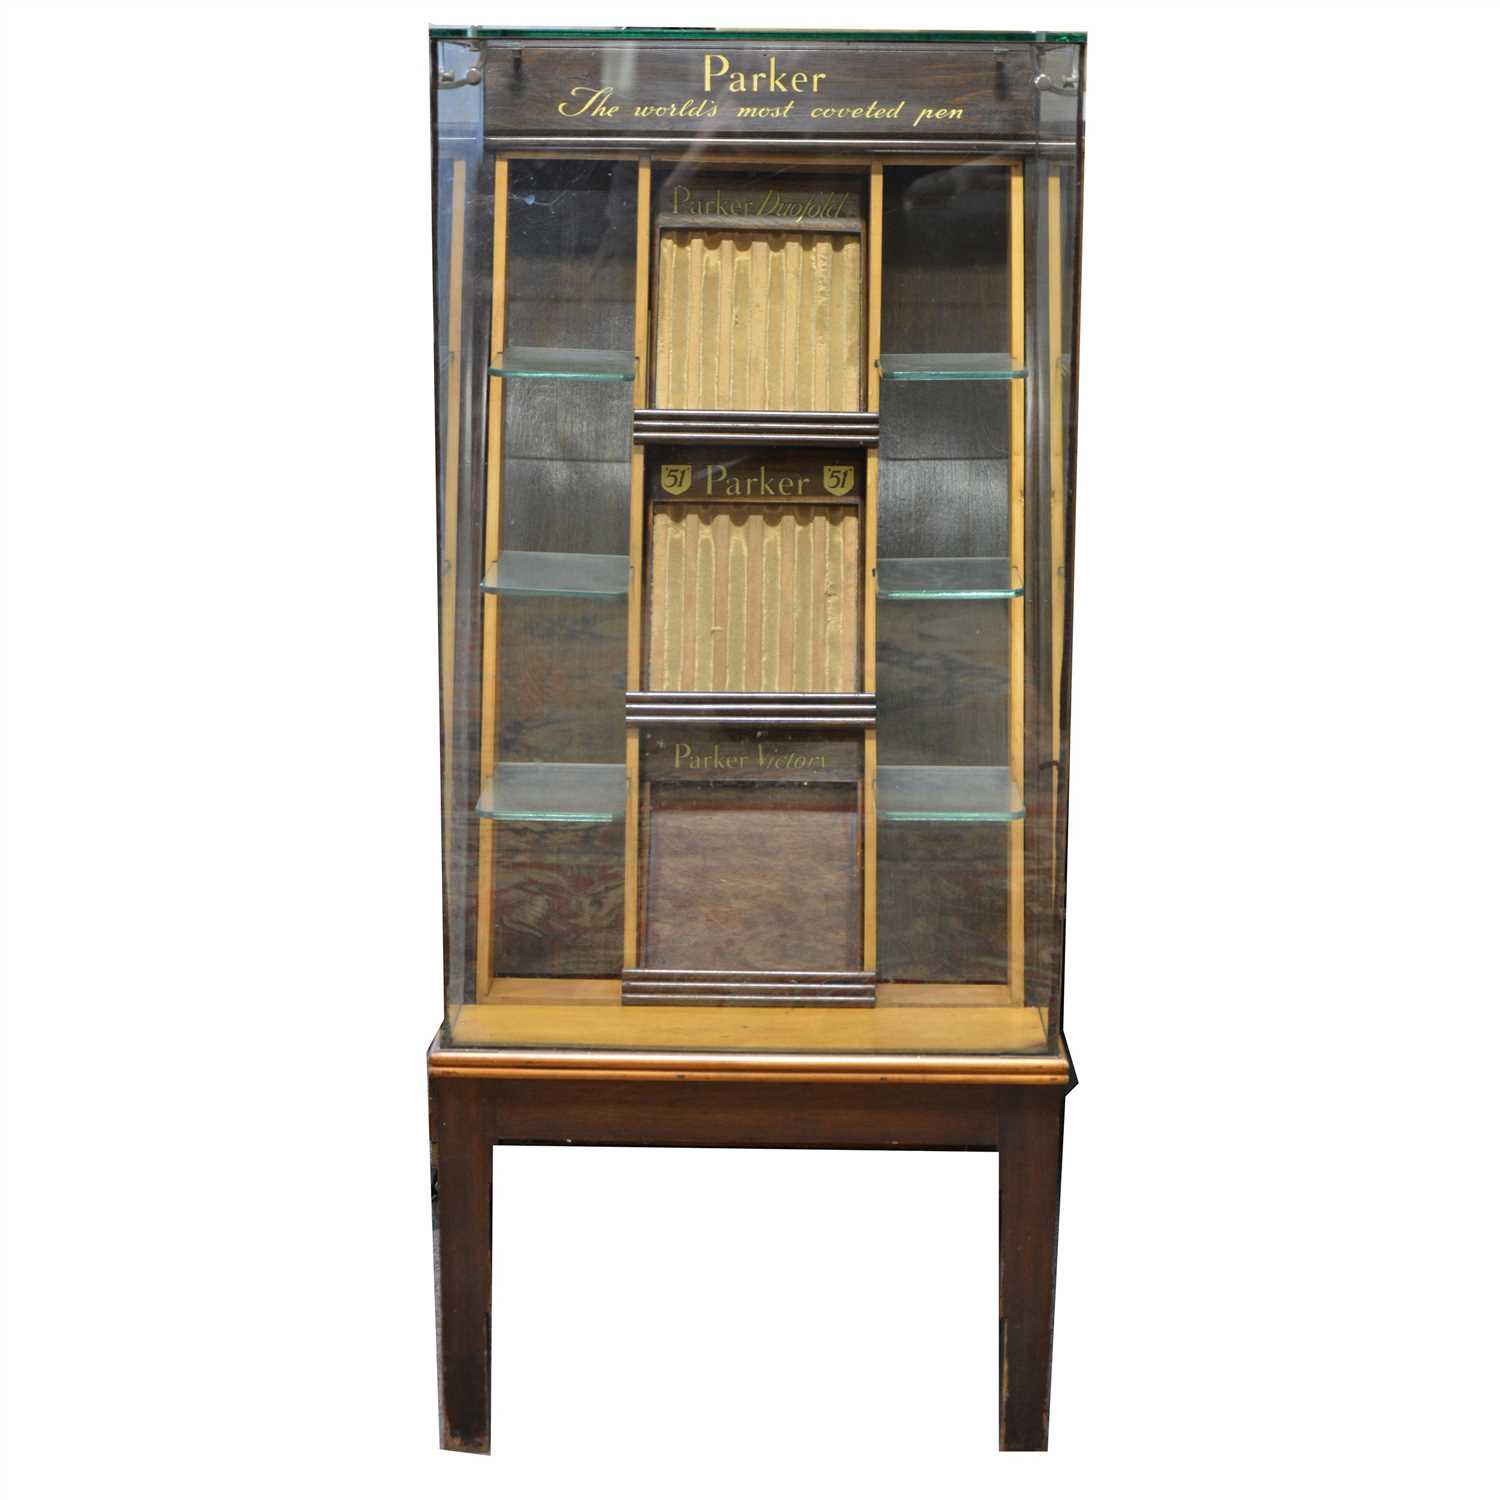 Lot 111 - Parker 'The Worlds Most Coveted Pen', a floor standing display cabinet